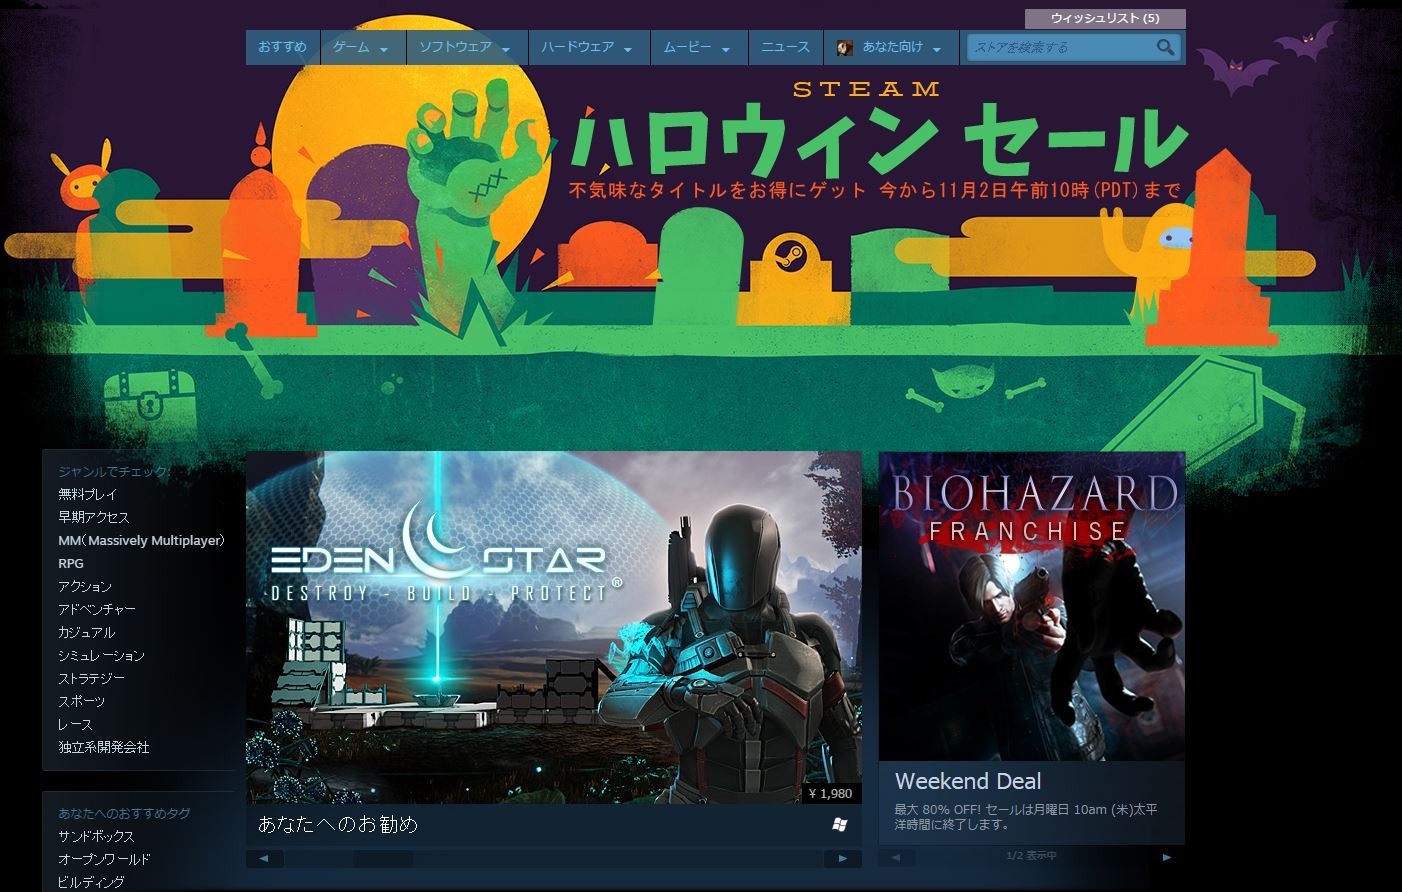 Steam ハロウィンセール 11月3日まで開催 The Witcher 3 をはじめ大型タイトル満載 Game Spark 国内 海外ゲーム情報サイト